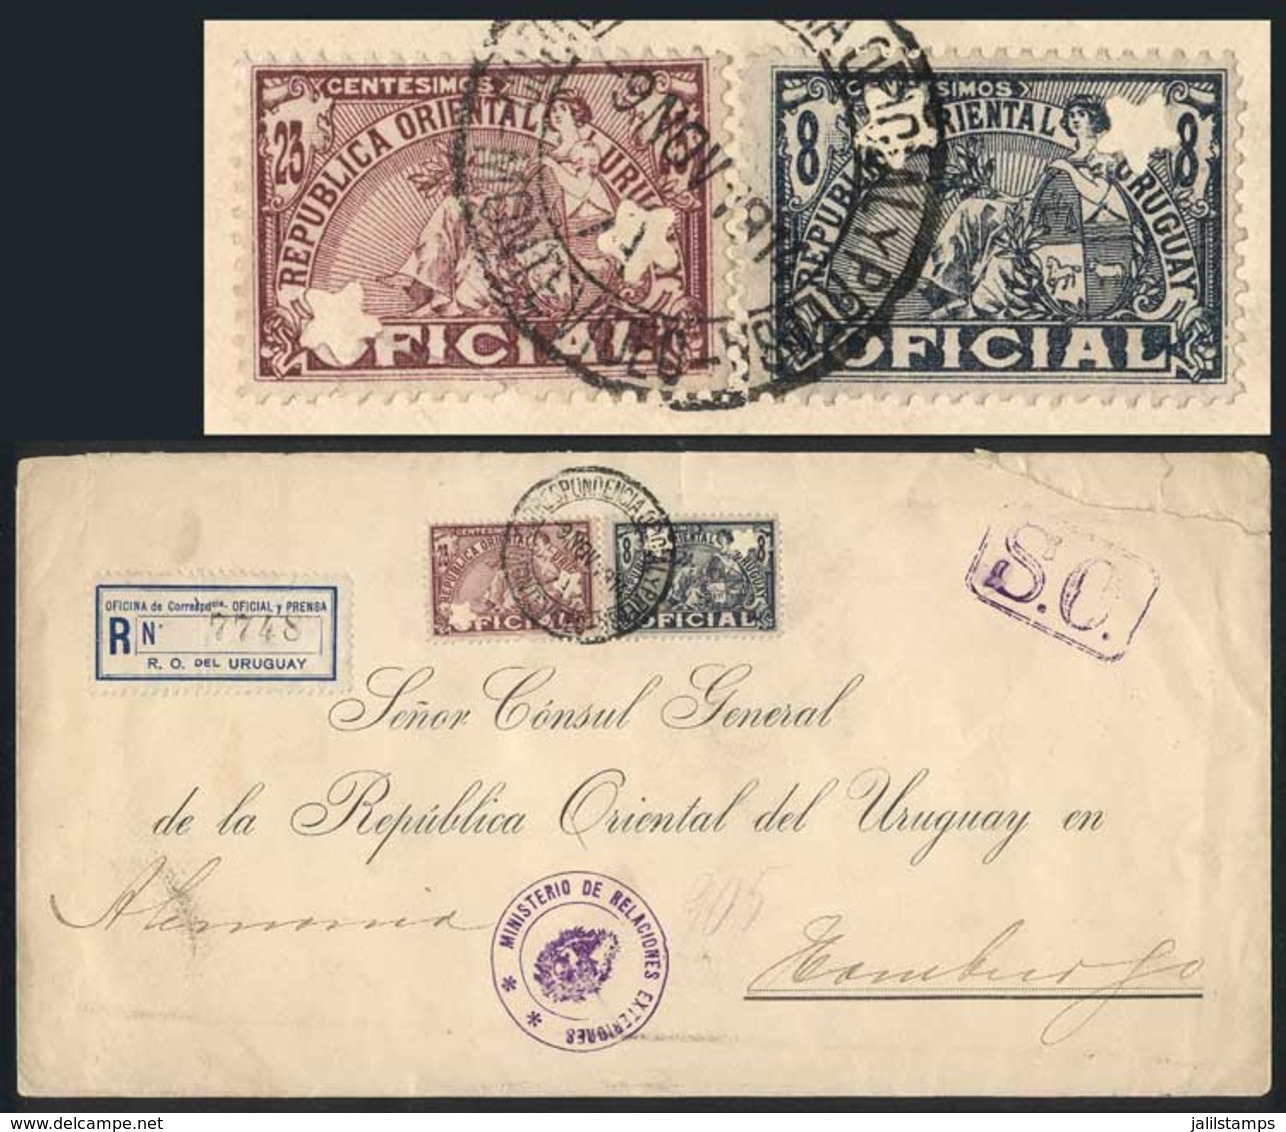 URUGUAY: Registered Cover Sent To Germany On 9/NO/1914, Franked By Sc.113 + O115, Both With Two Star Punch Holes, VF Qua - Uruguay